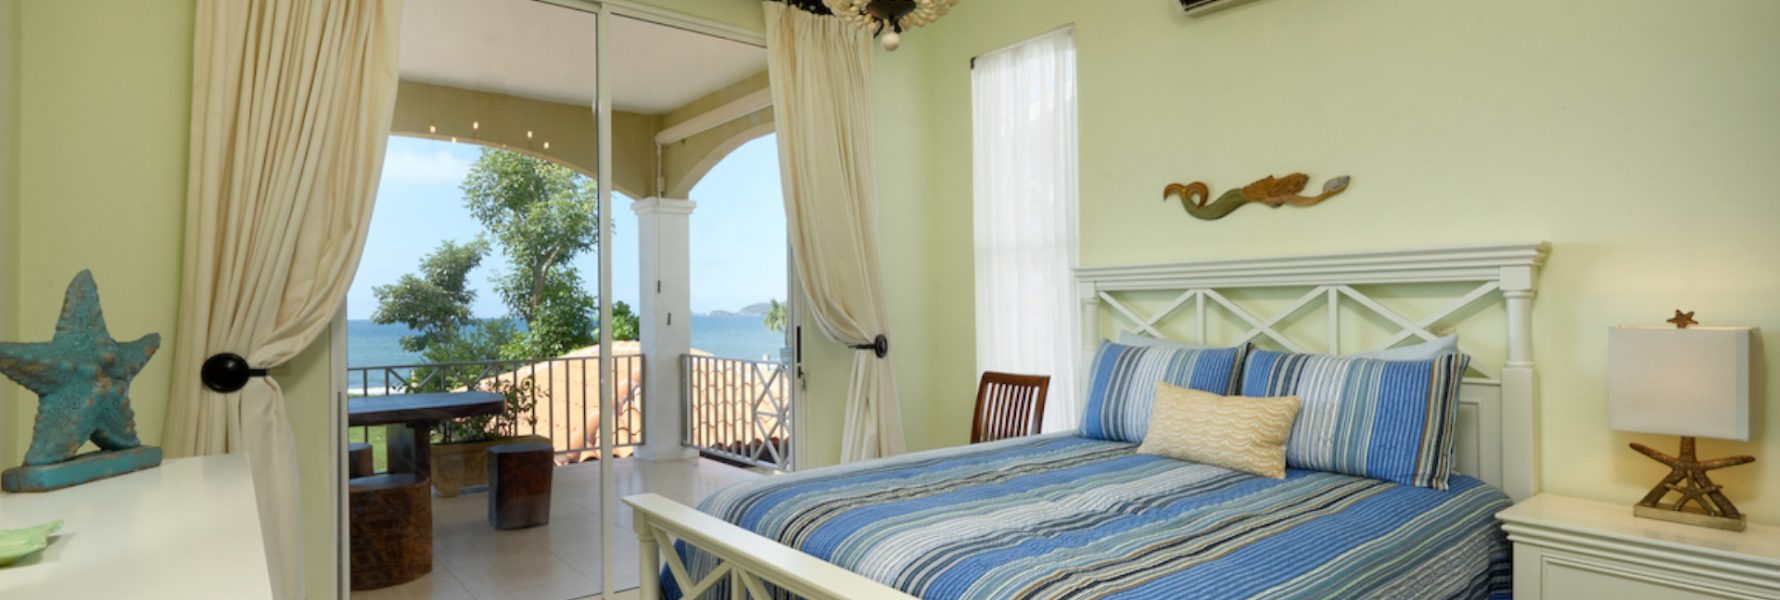 Right from this bedroom you have balcony access, the bedroom is also air conditioned if needed.